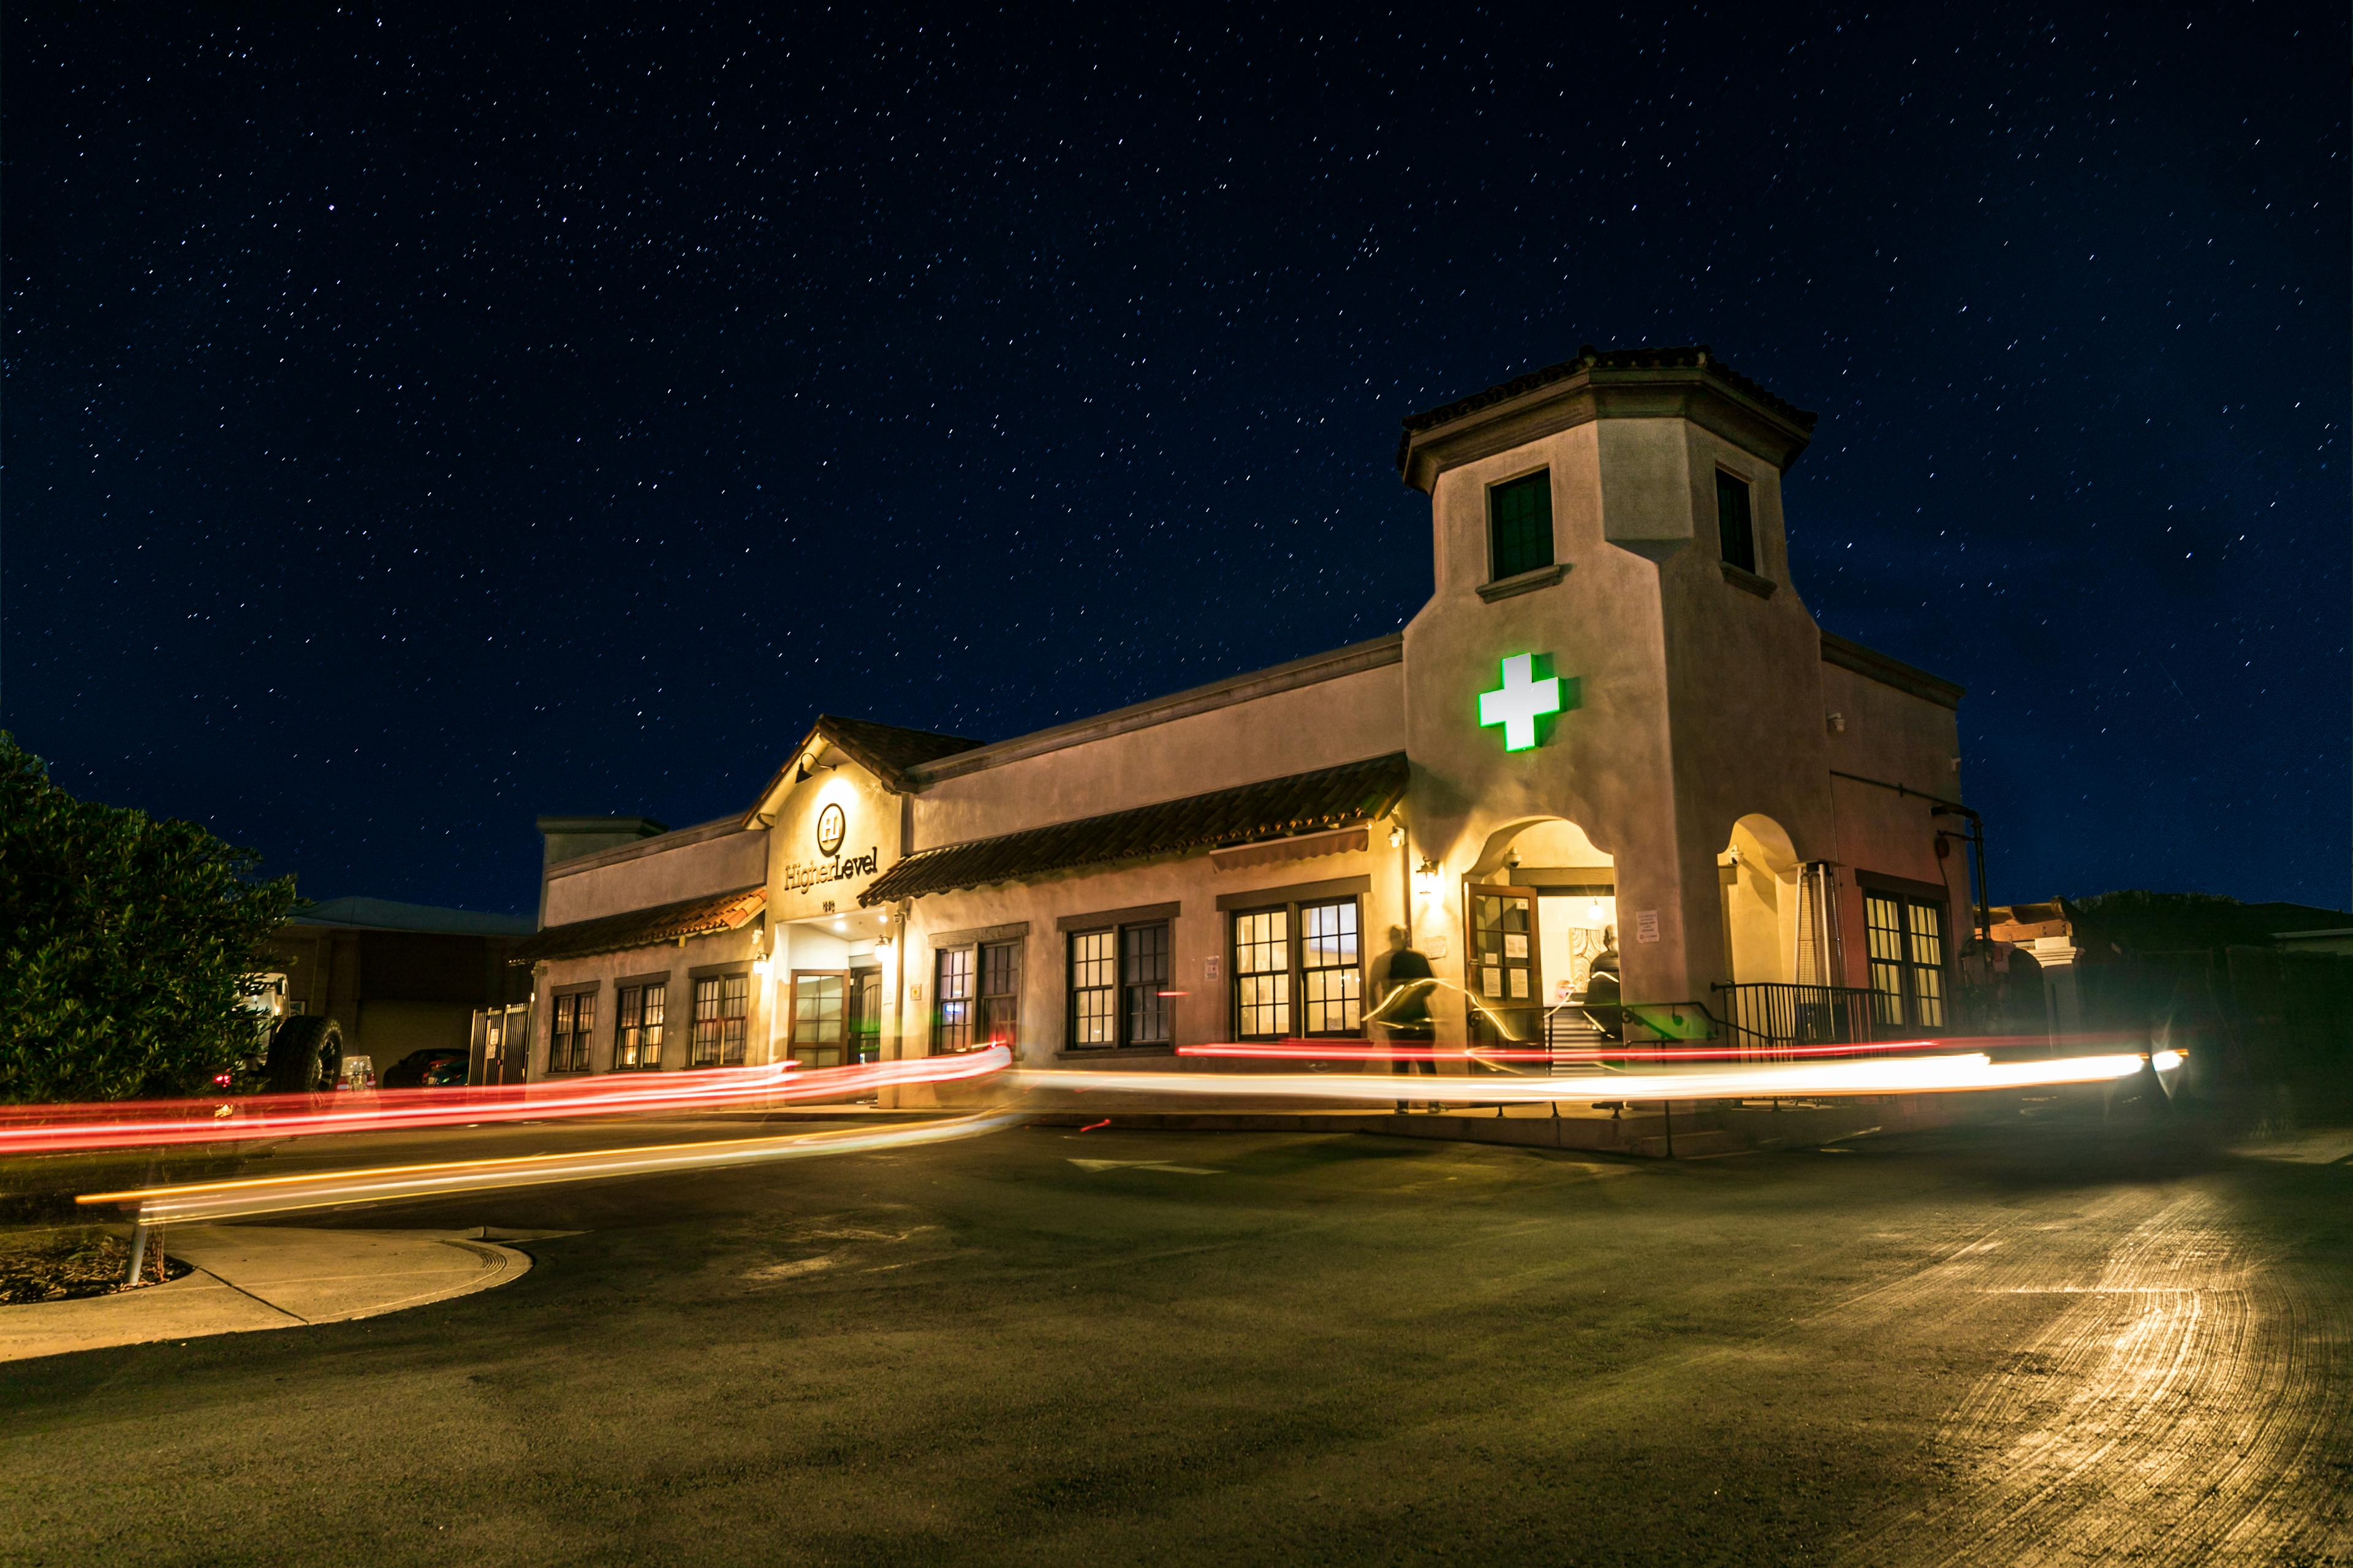 An exterior shot of Higher Level dispensary at night, showcasing the starry sky above and light trails from passing cars, with a green medical cross sign indicating the nature of the business.